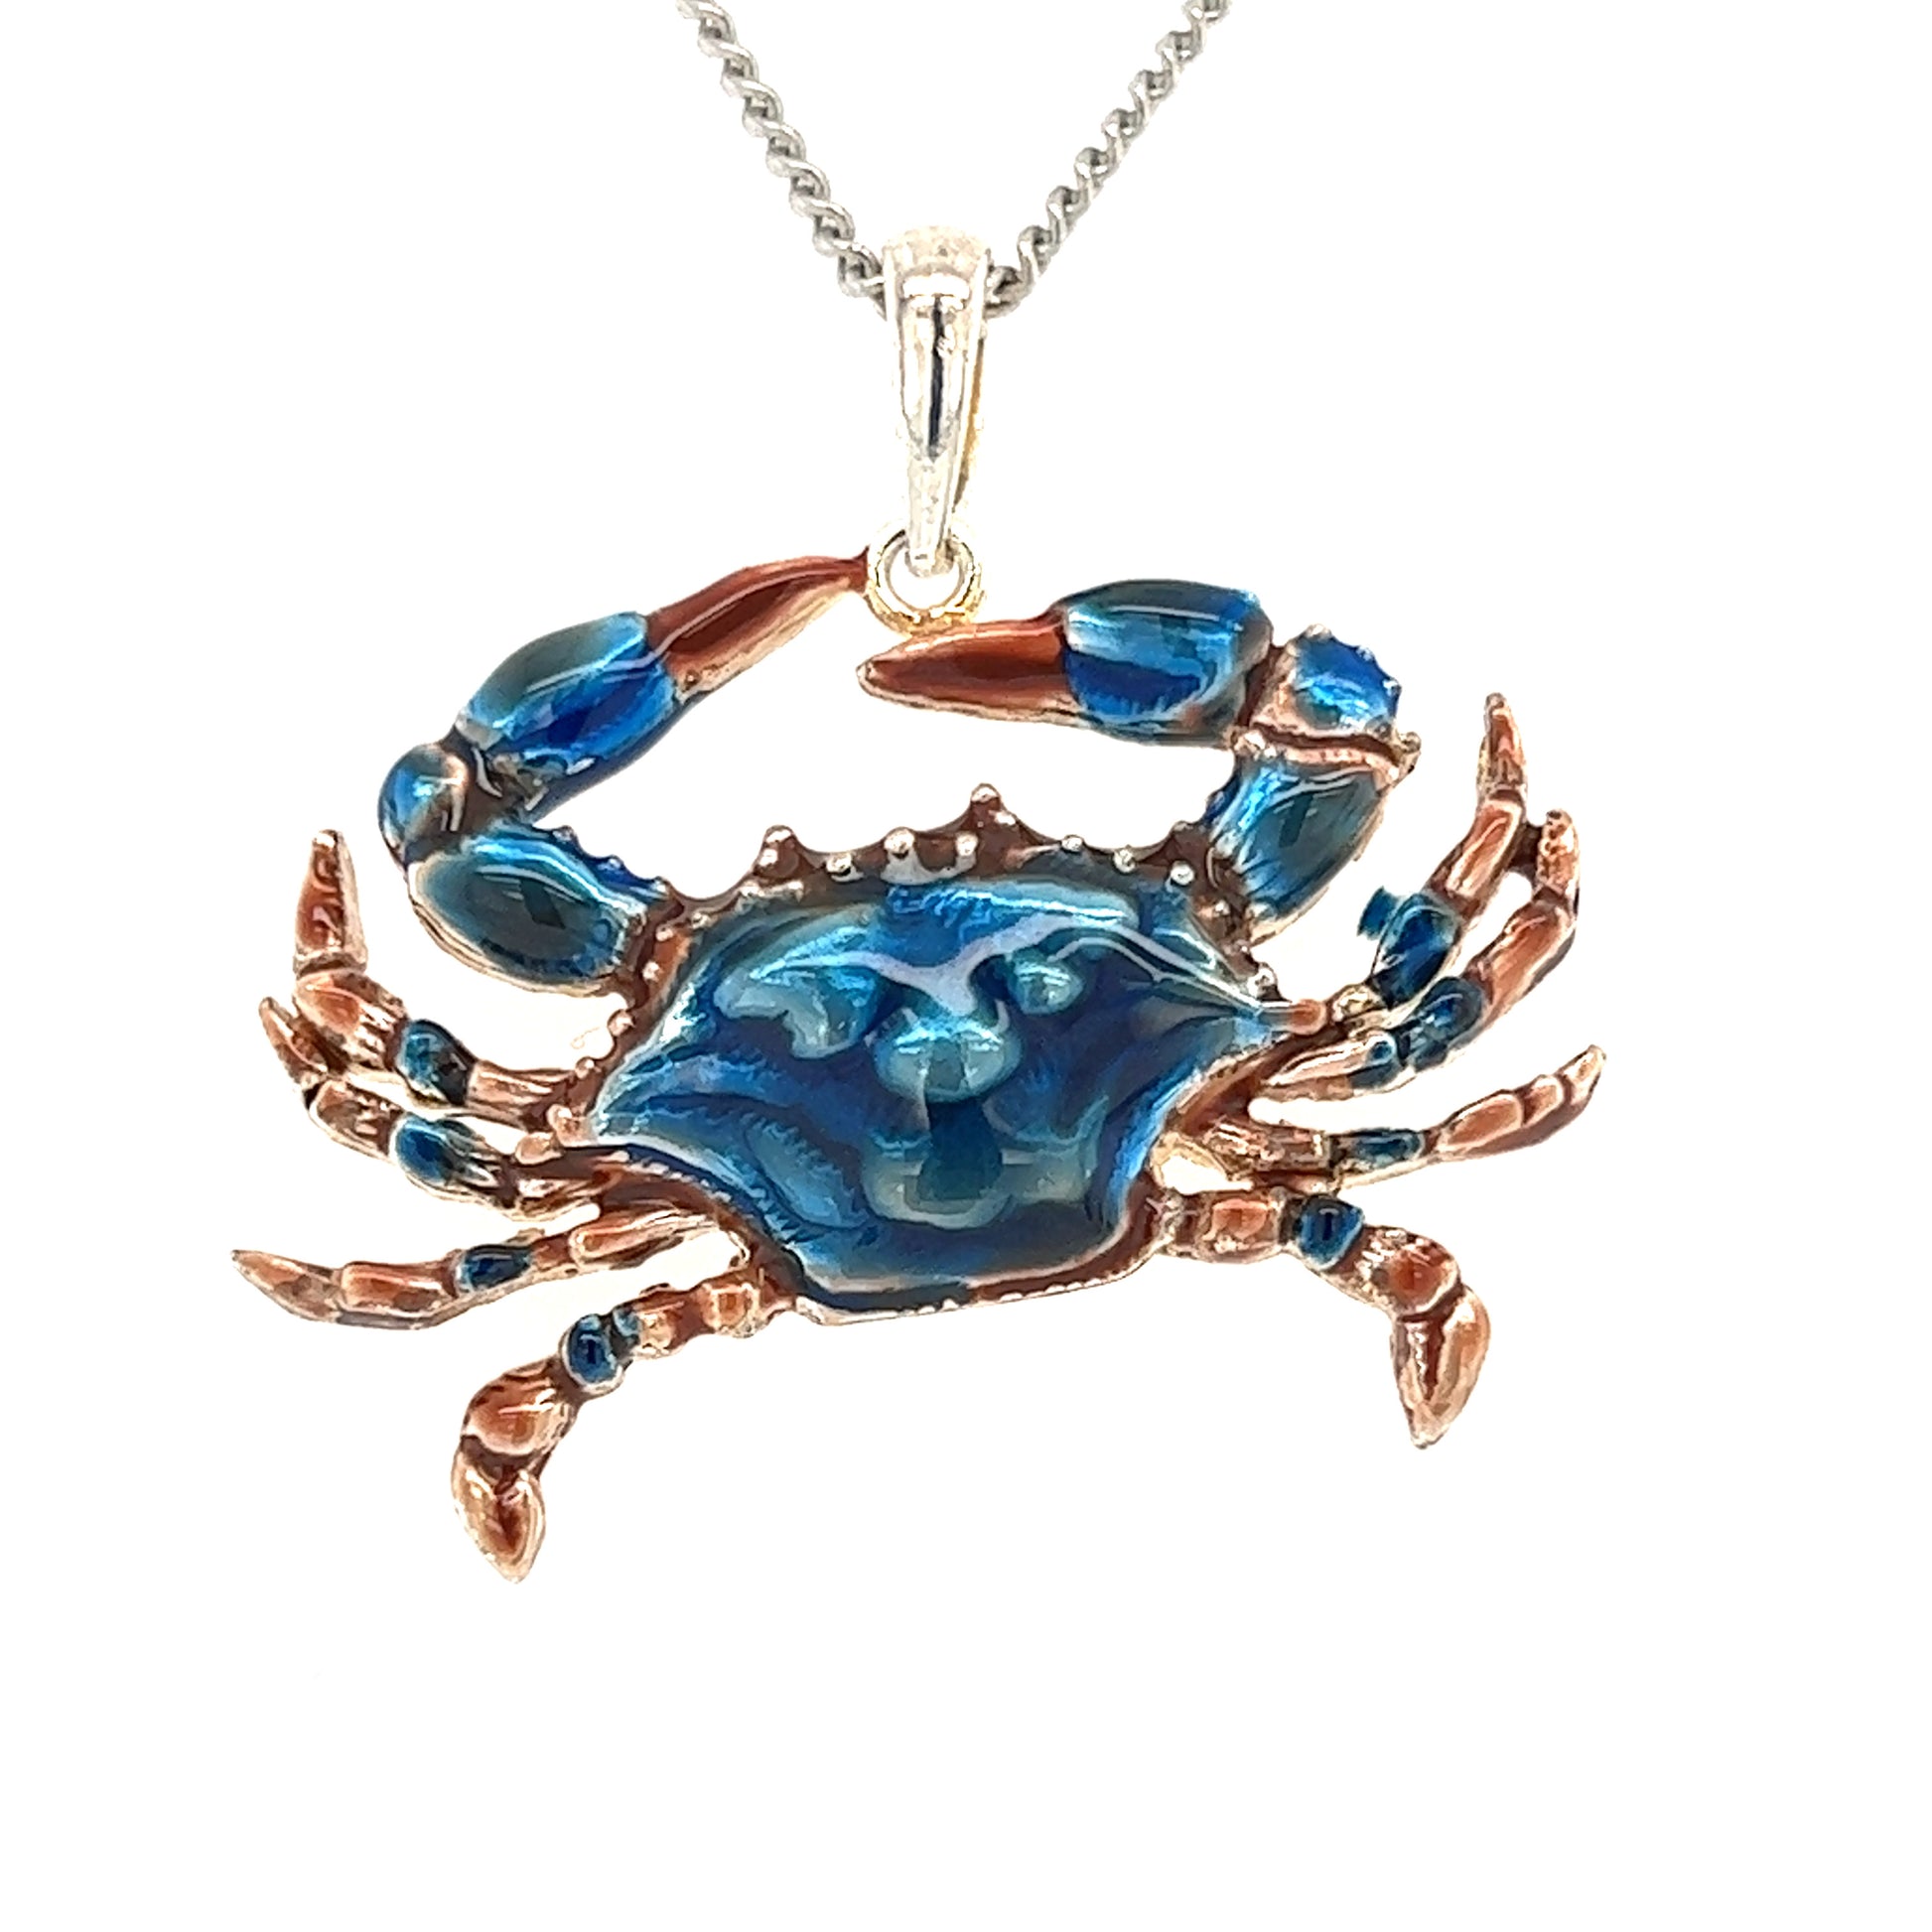 Blue Crab Large Pendant with Enamel in Sterling Silver Pendant and Chain Front View